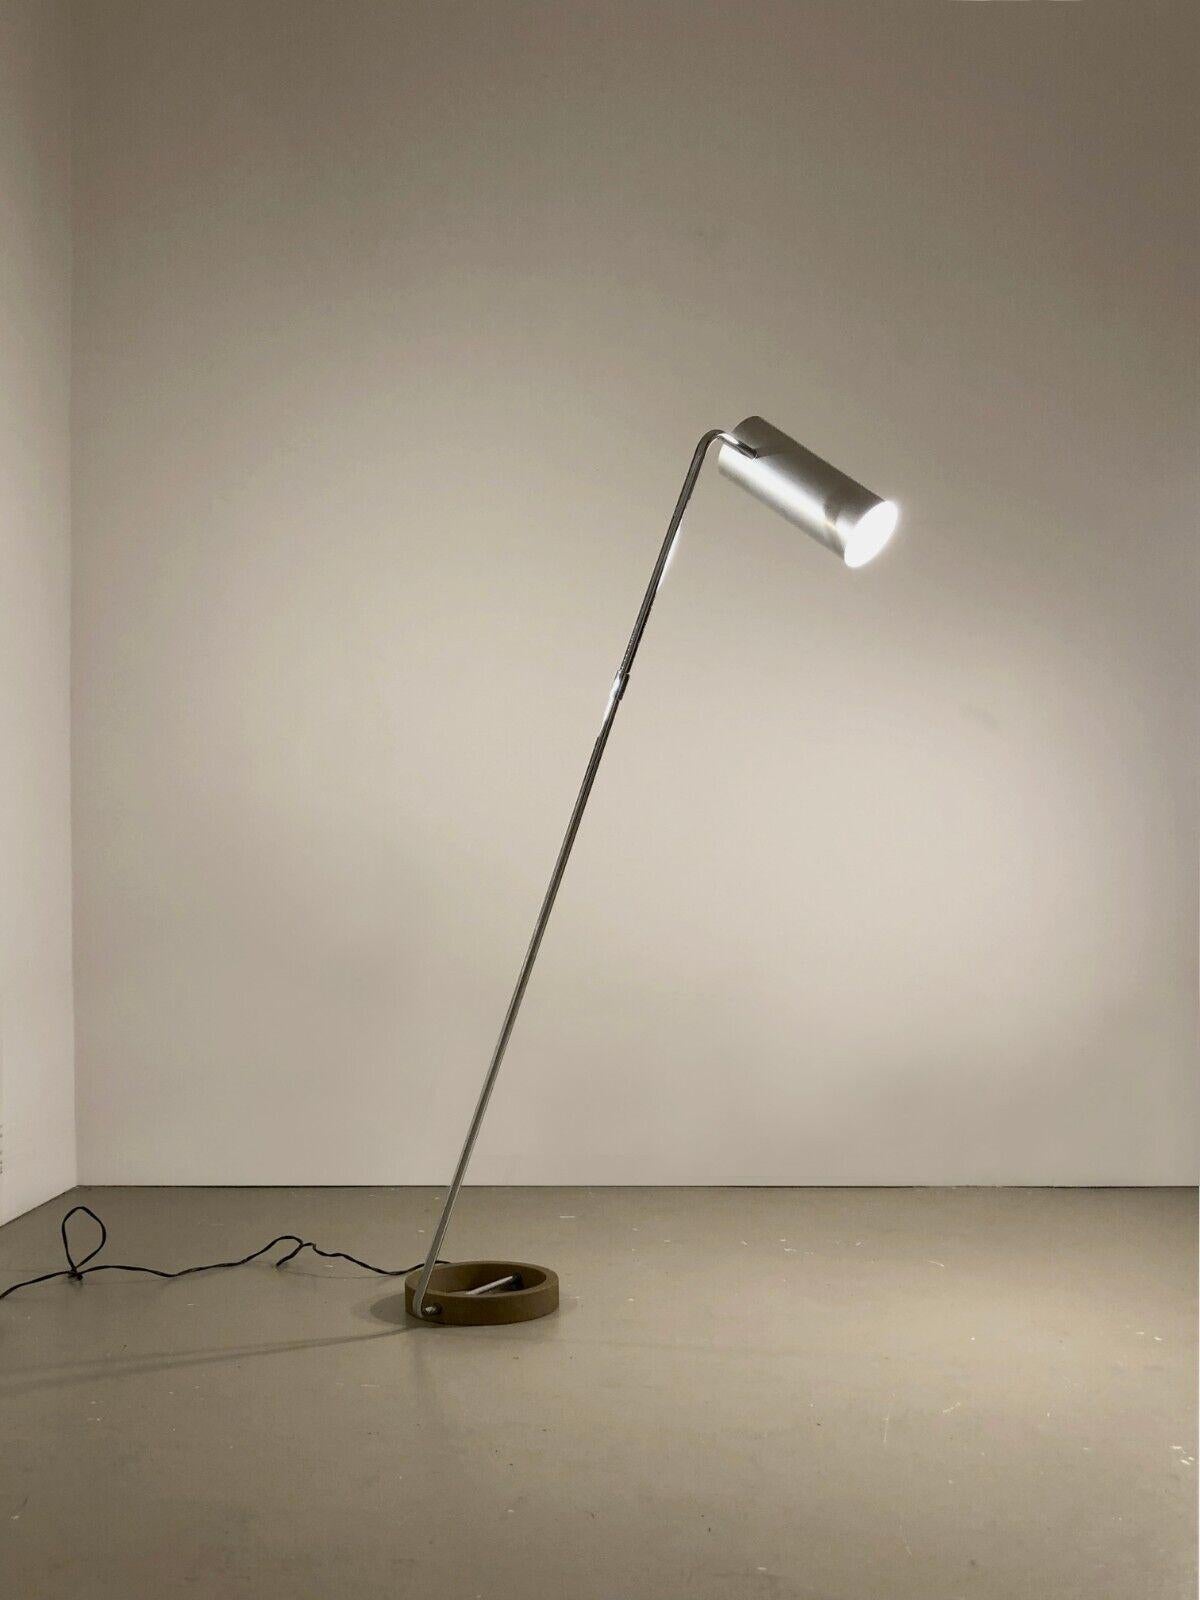 A small adjustable floor lamp or reading light, Post-Modernist, Minimalist, circular base in brown granite cast iron, vertical axis adjustable at the base and at the top, cylindrical lampshade in brushed aluminum with integrated switch also